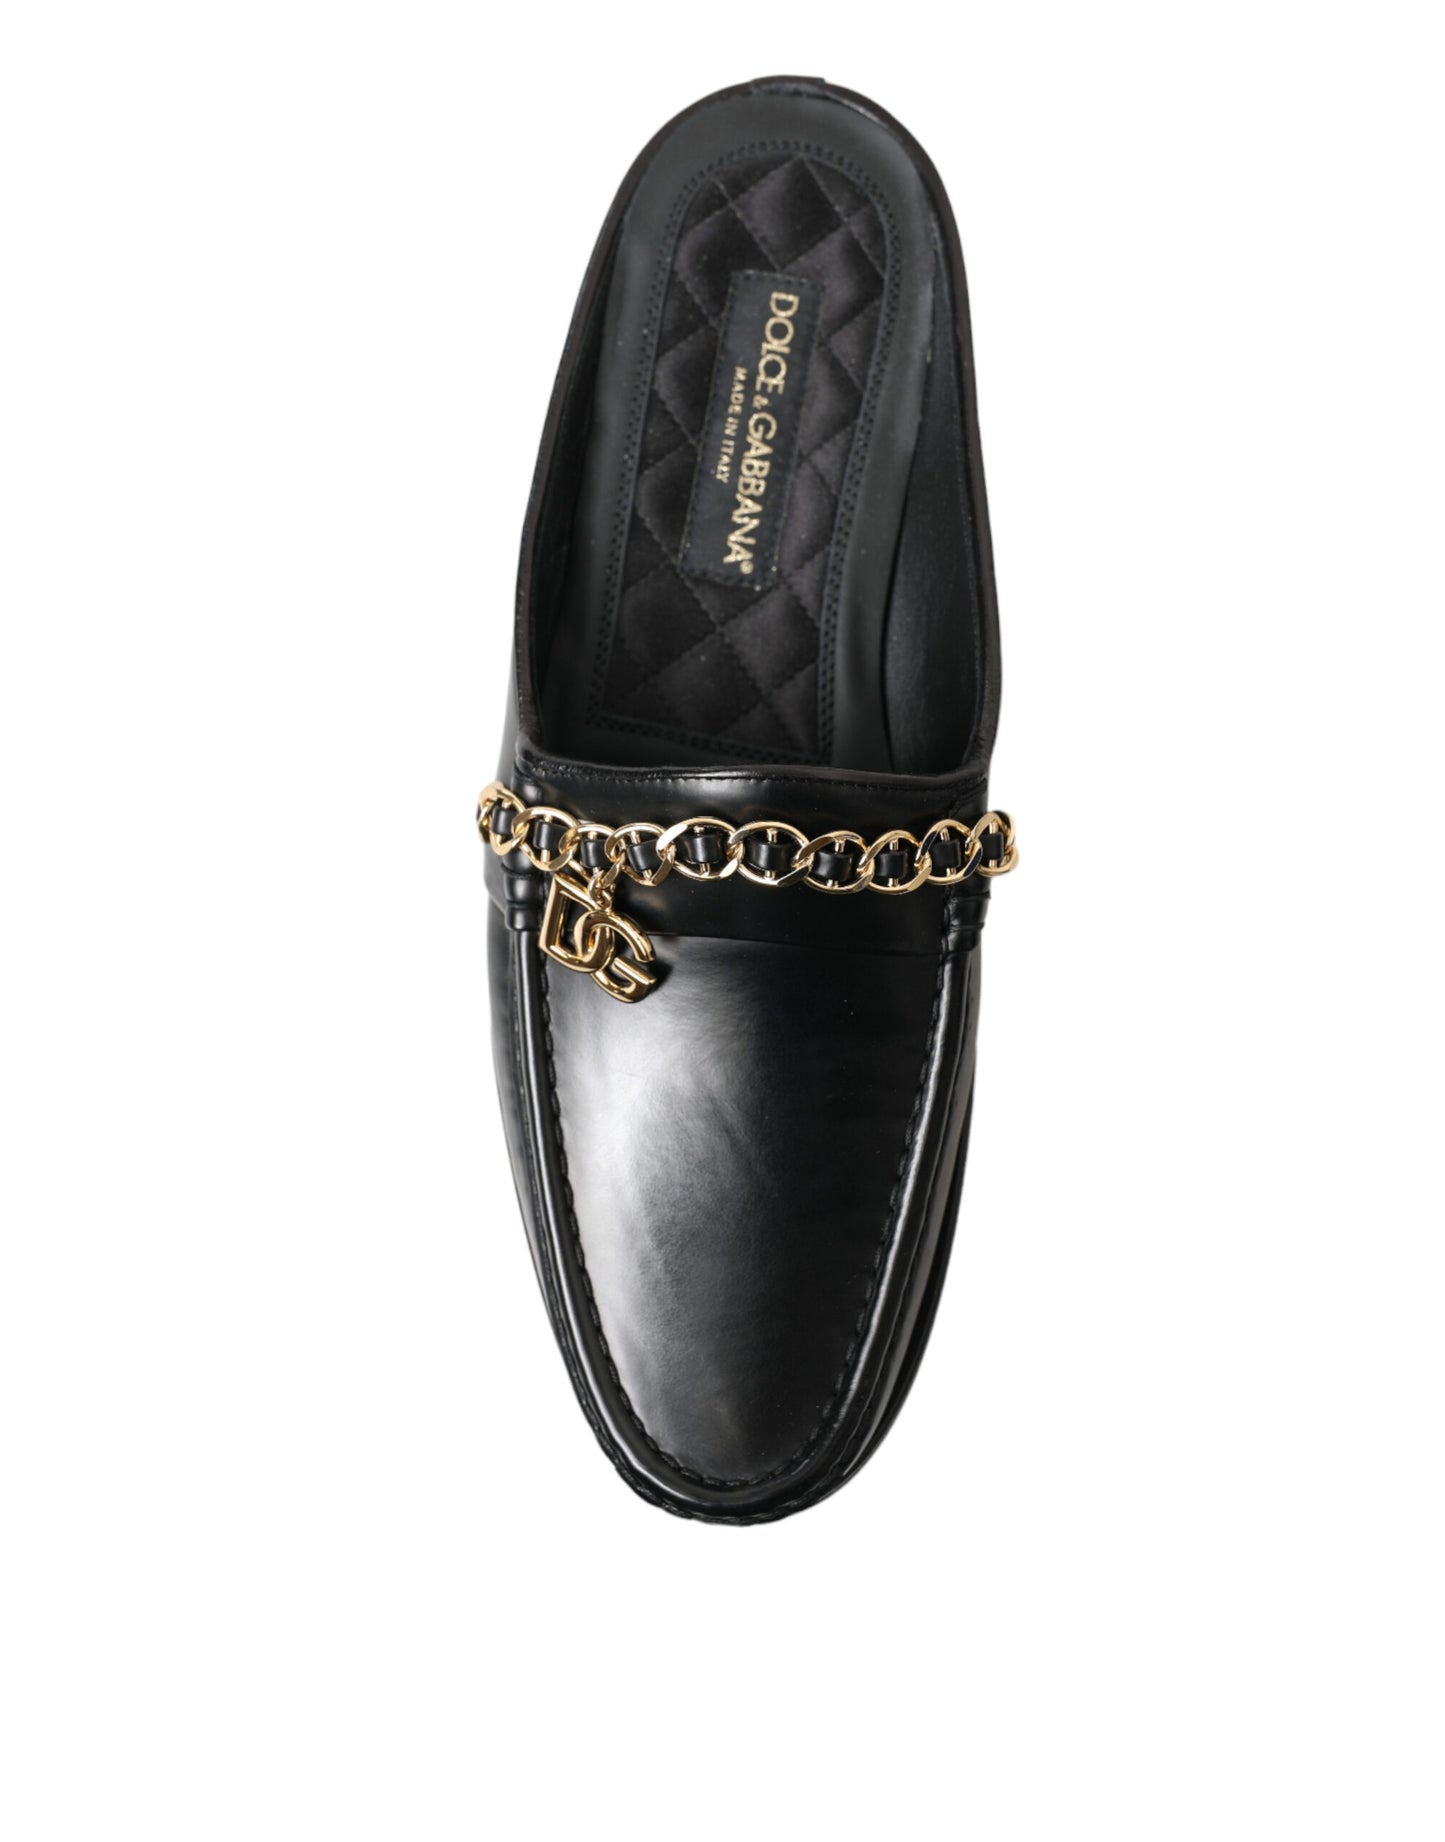 Black Leather Visconti Slippers Dress Shoes